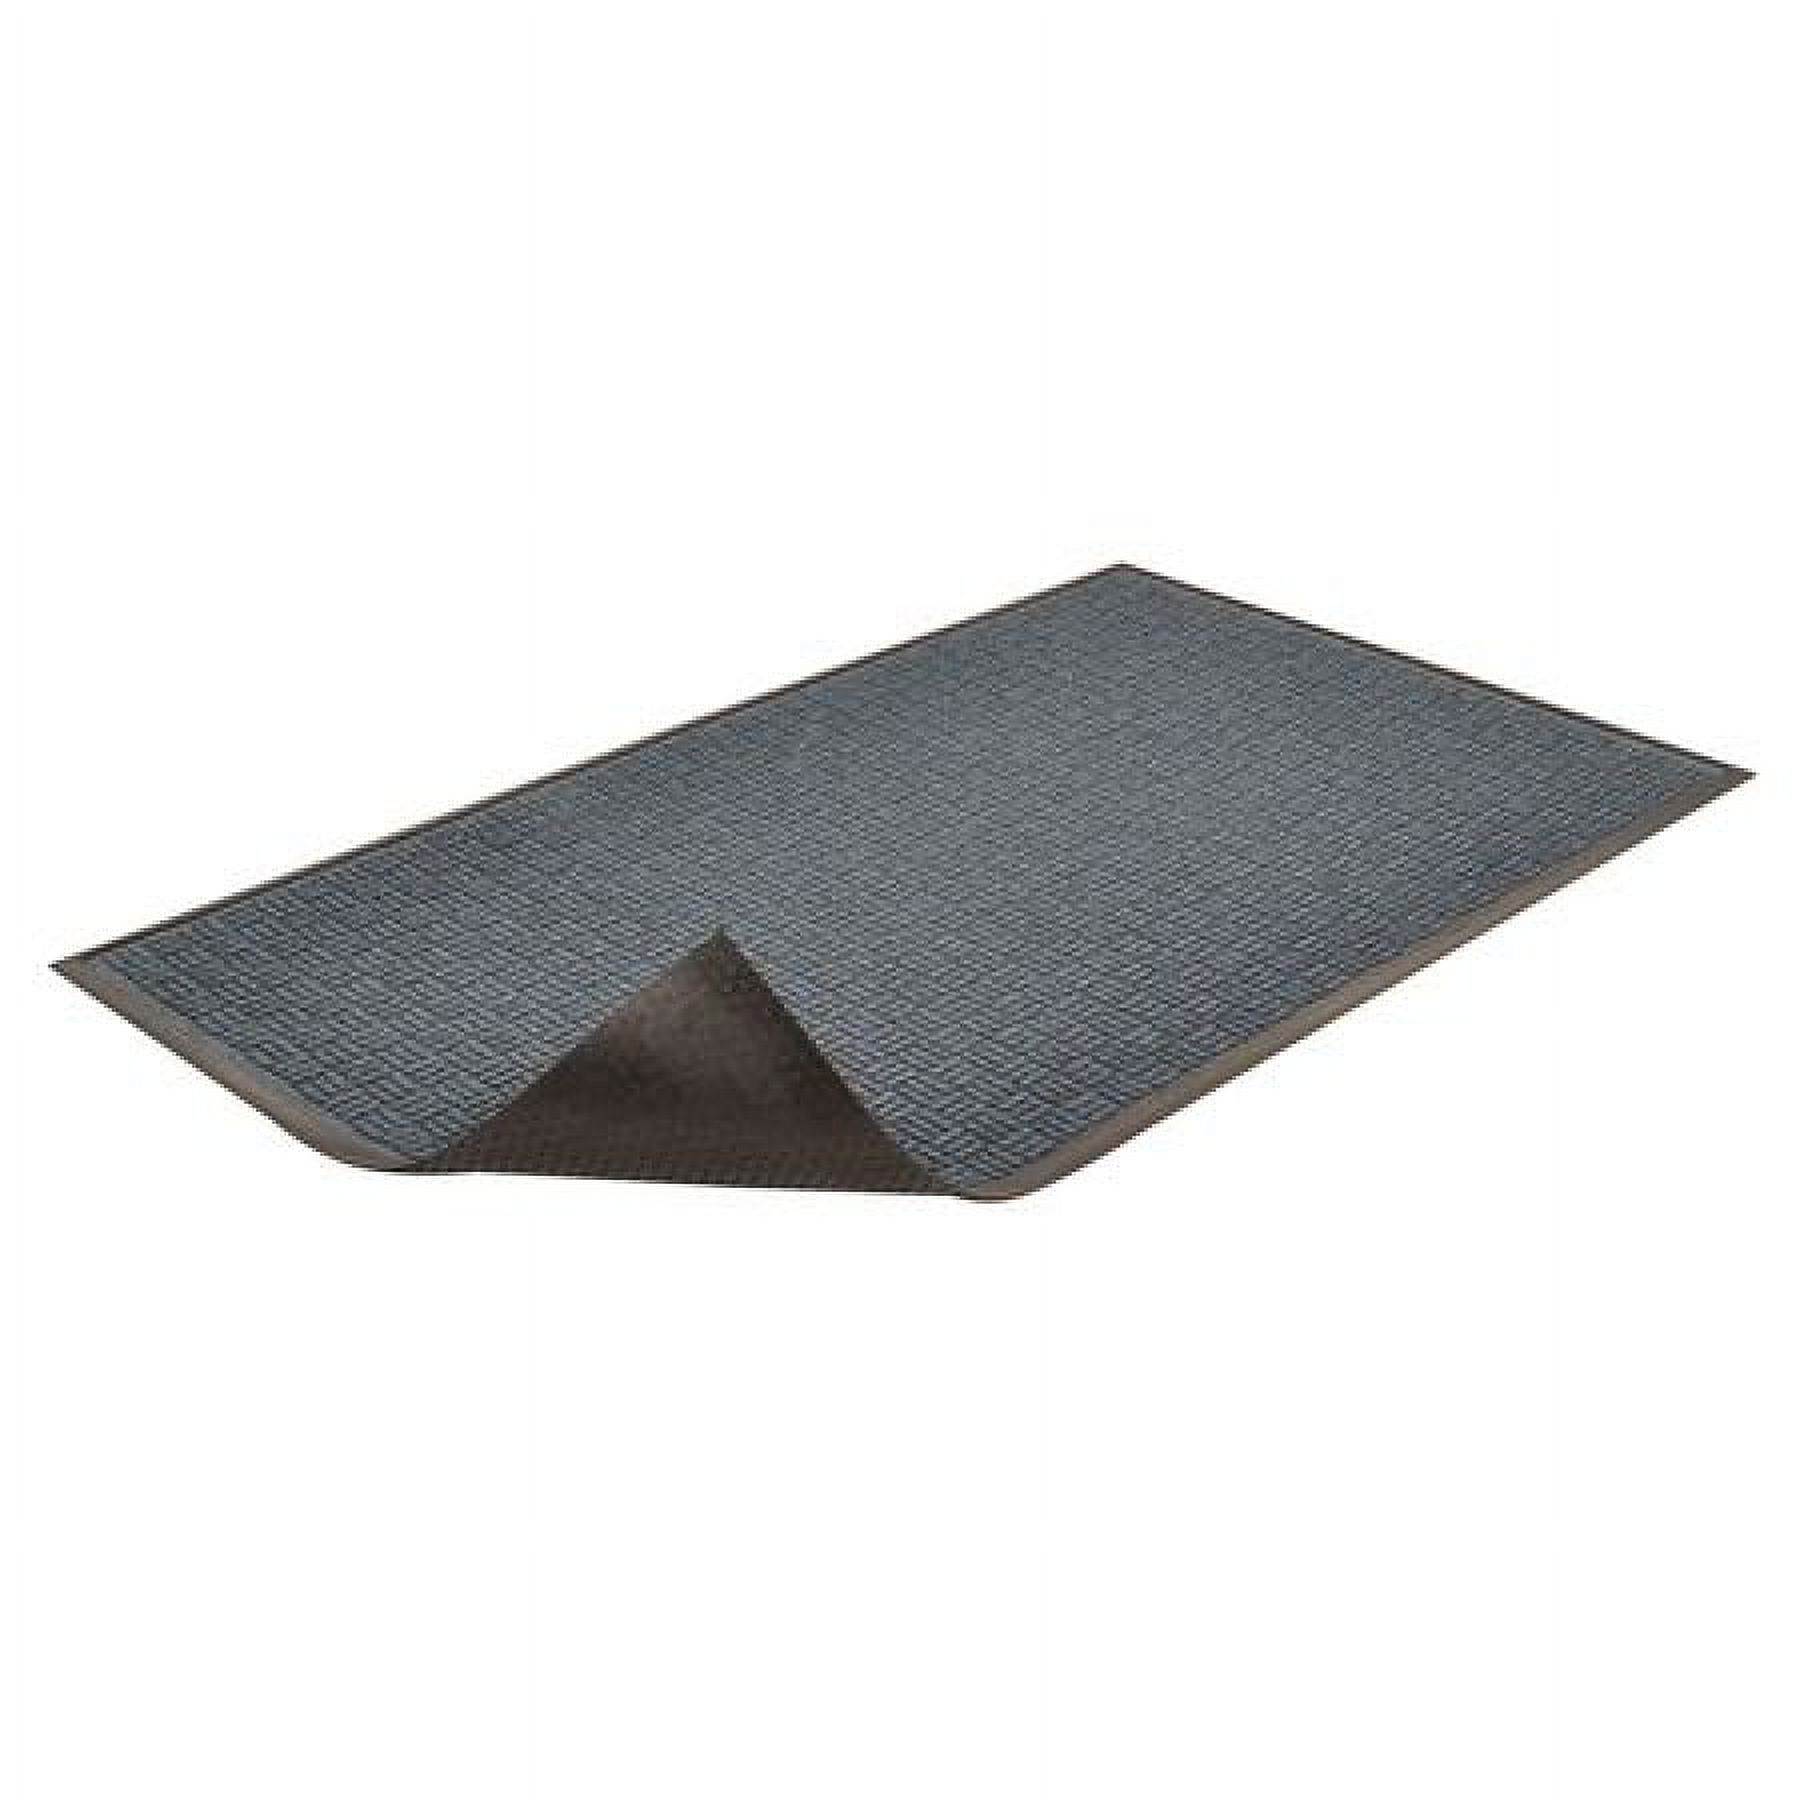 Notrax Carpeted Entrance Mat,Blue,3ft. x 5ft.  167S0035BU - image 5 of 5